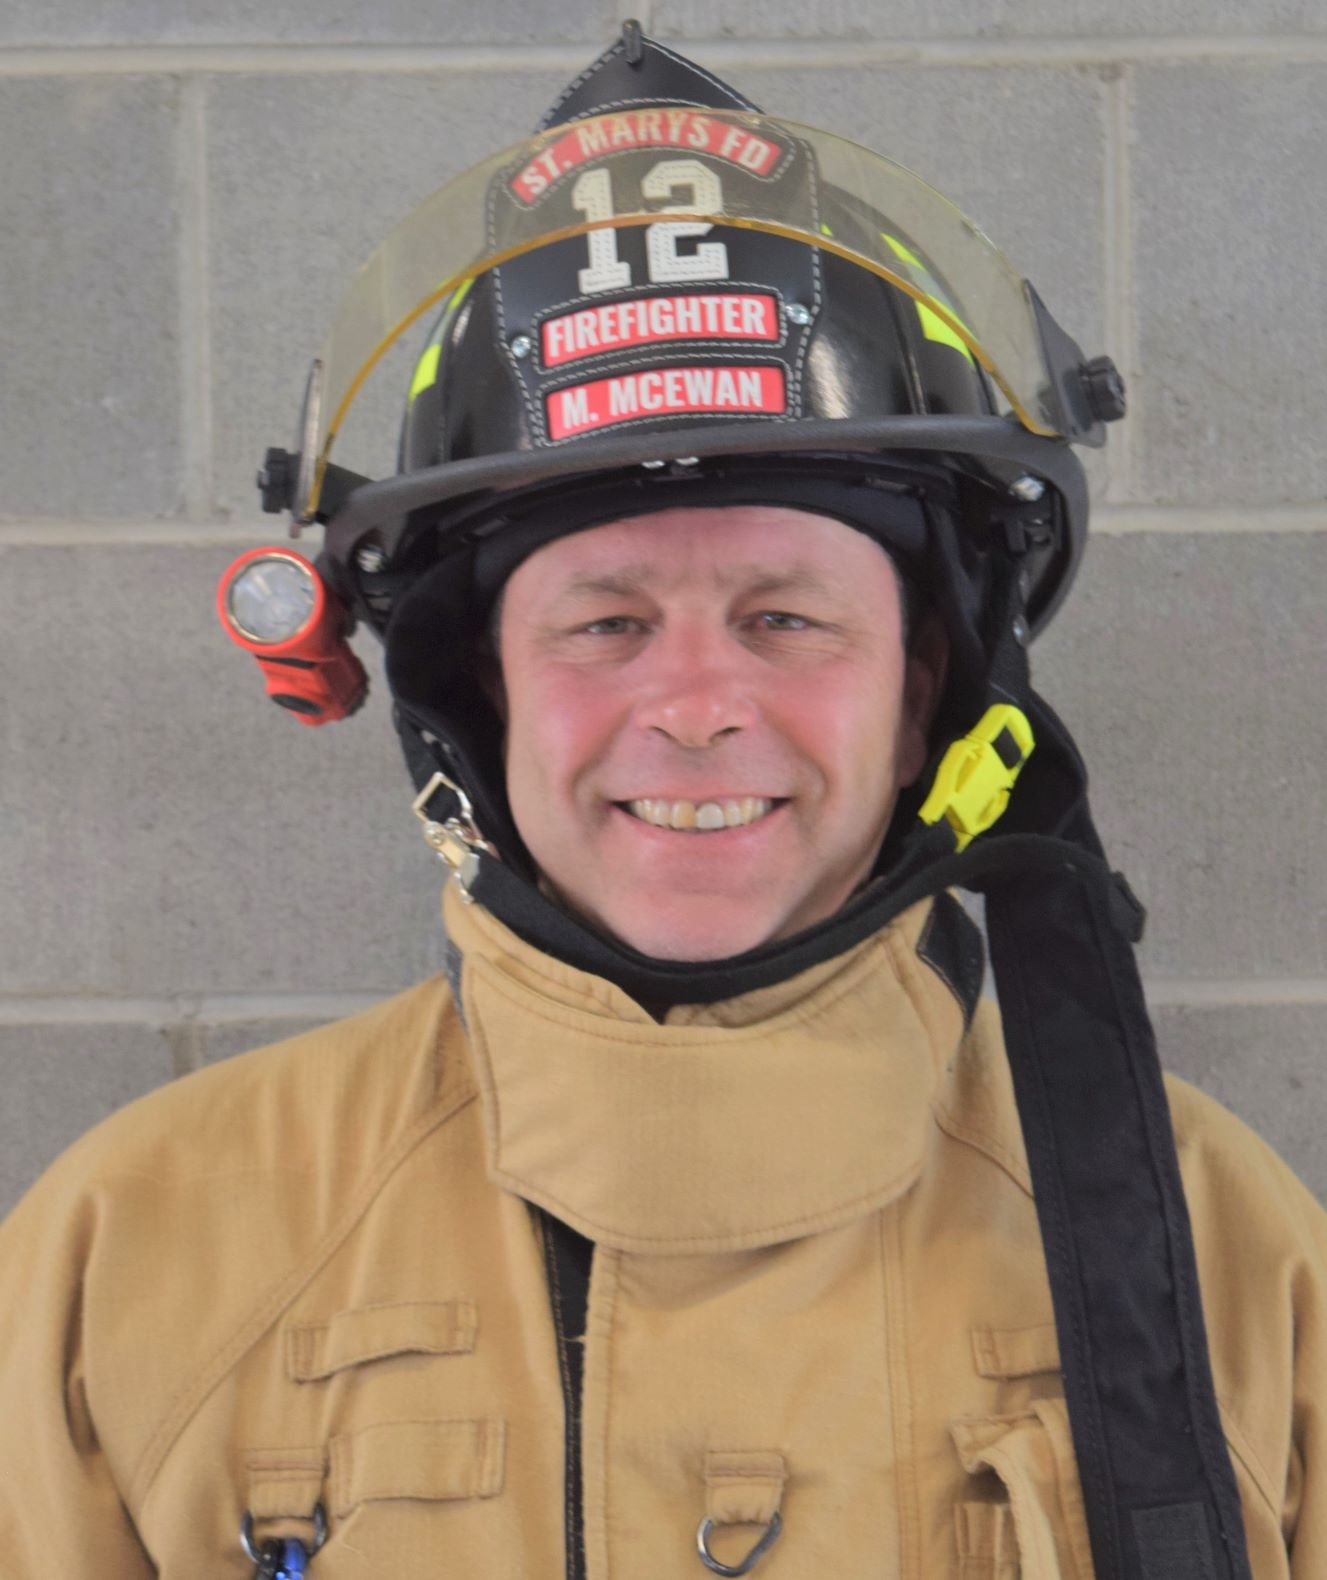 Mark McEwan is Octobers “Firefighter of the Month”.